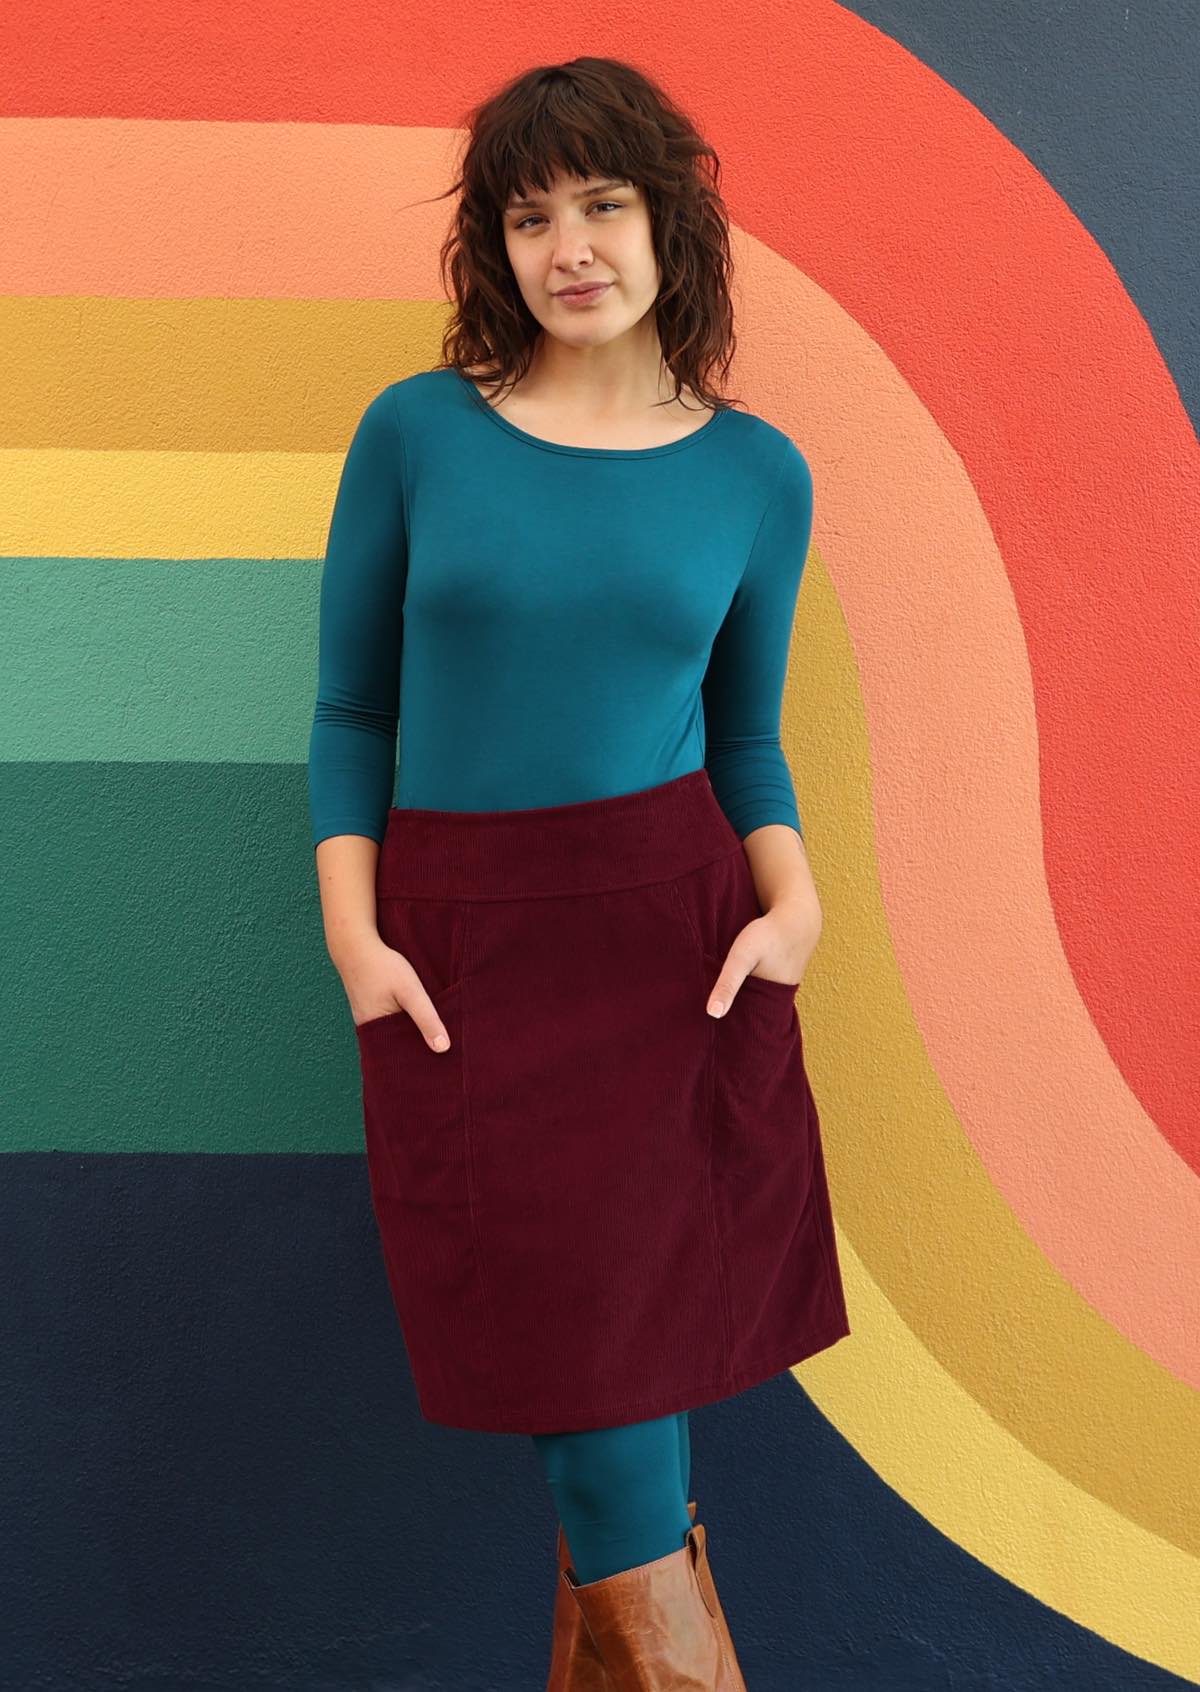 Slight A-line above knee skirt with front pockets